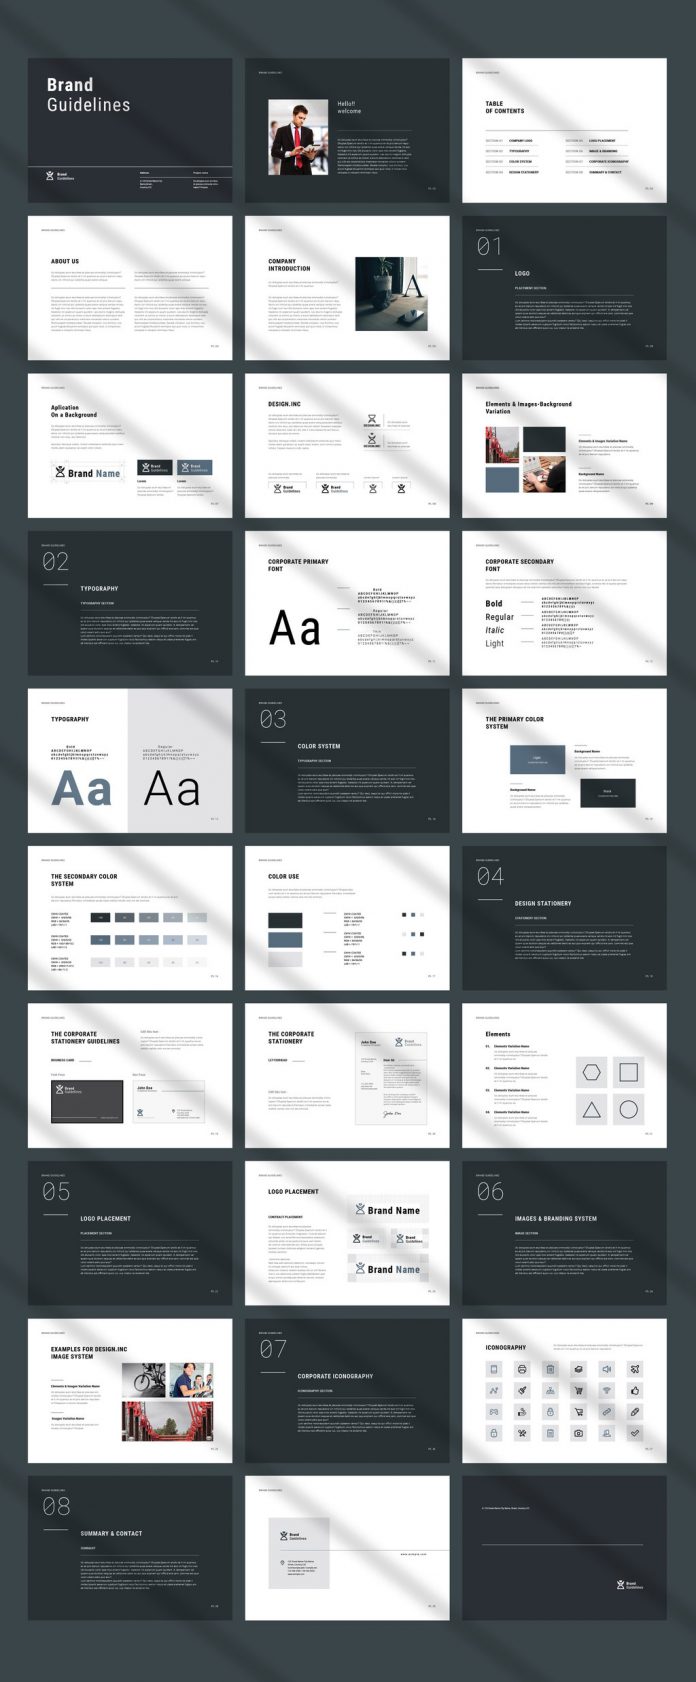 Download a Minimal Adobe InDesign Brand Guidelines Layout with 30 Pages